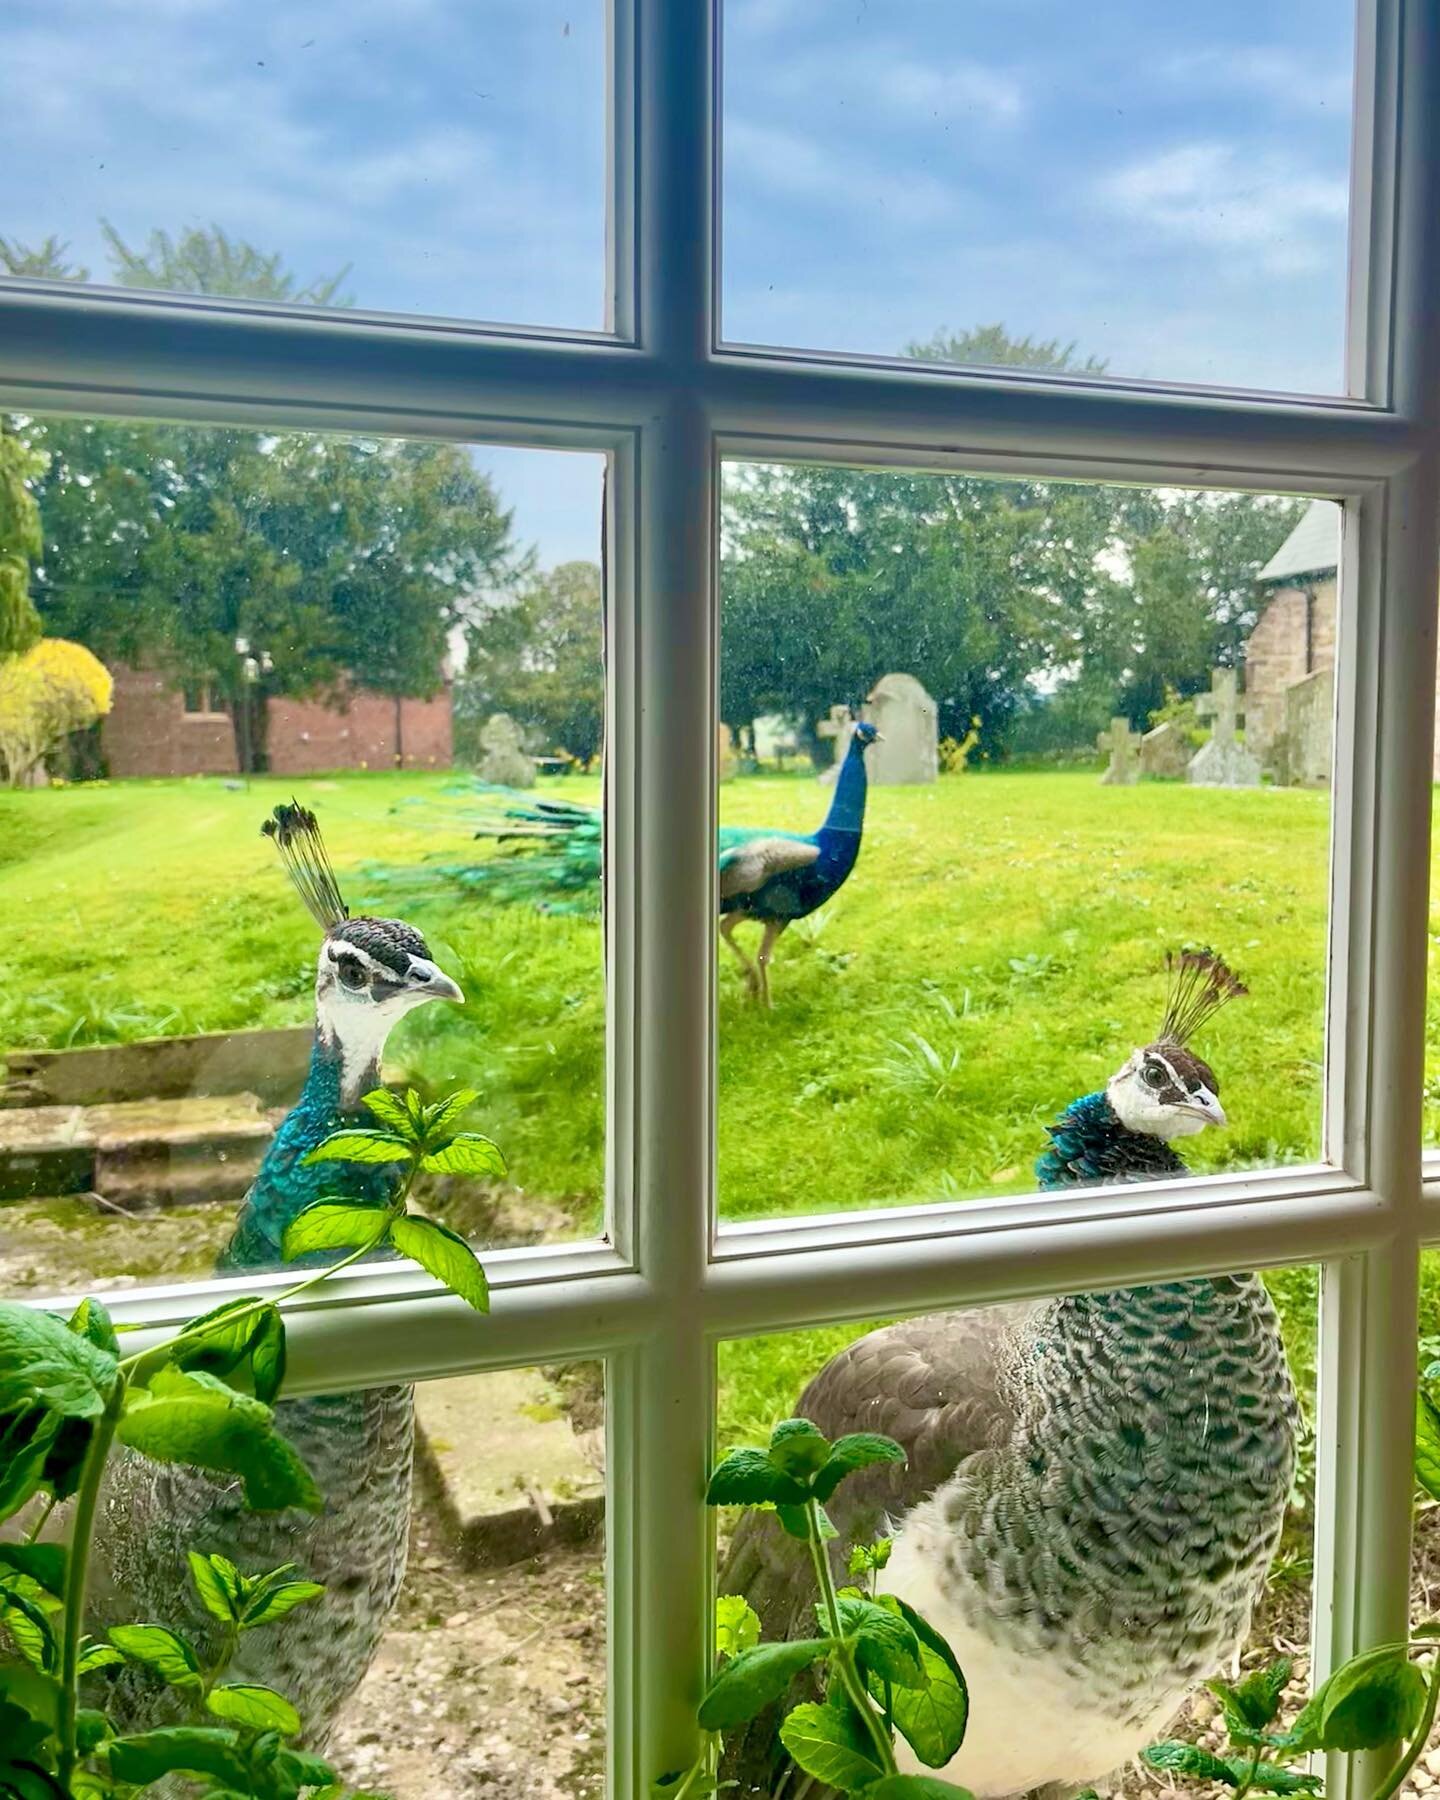 Our nosy residents waiting for their breakfast 🦚